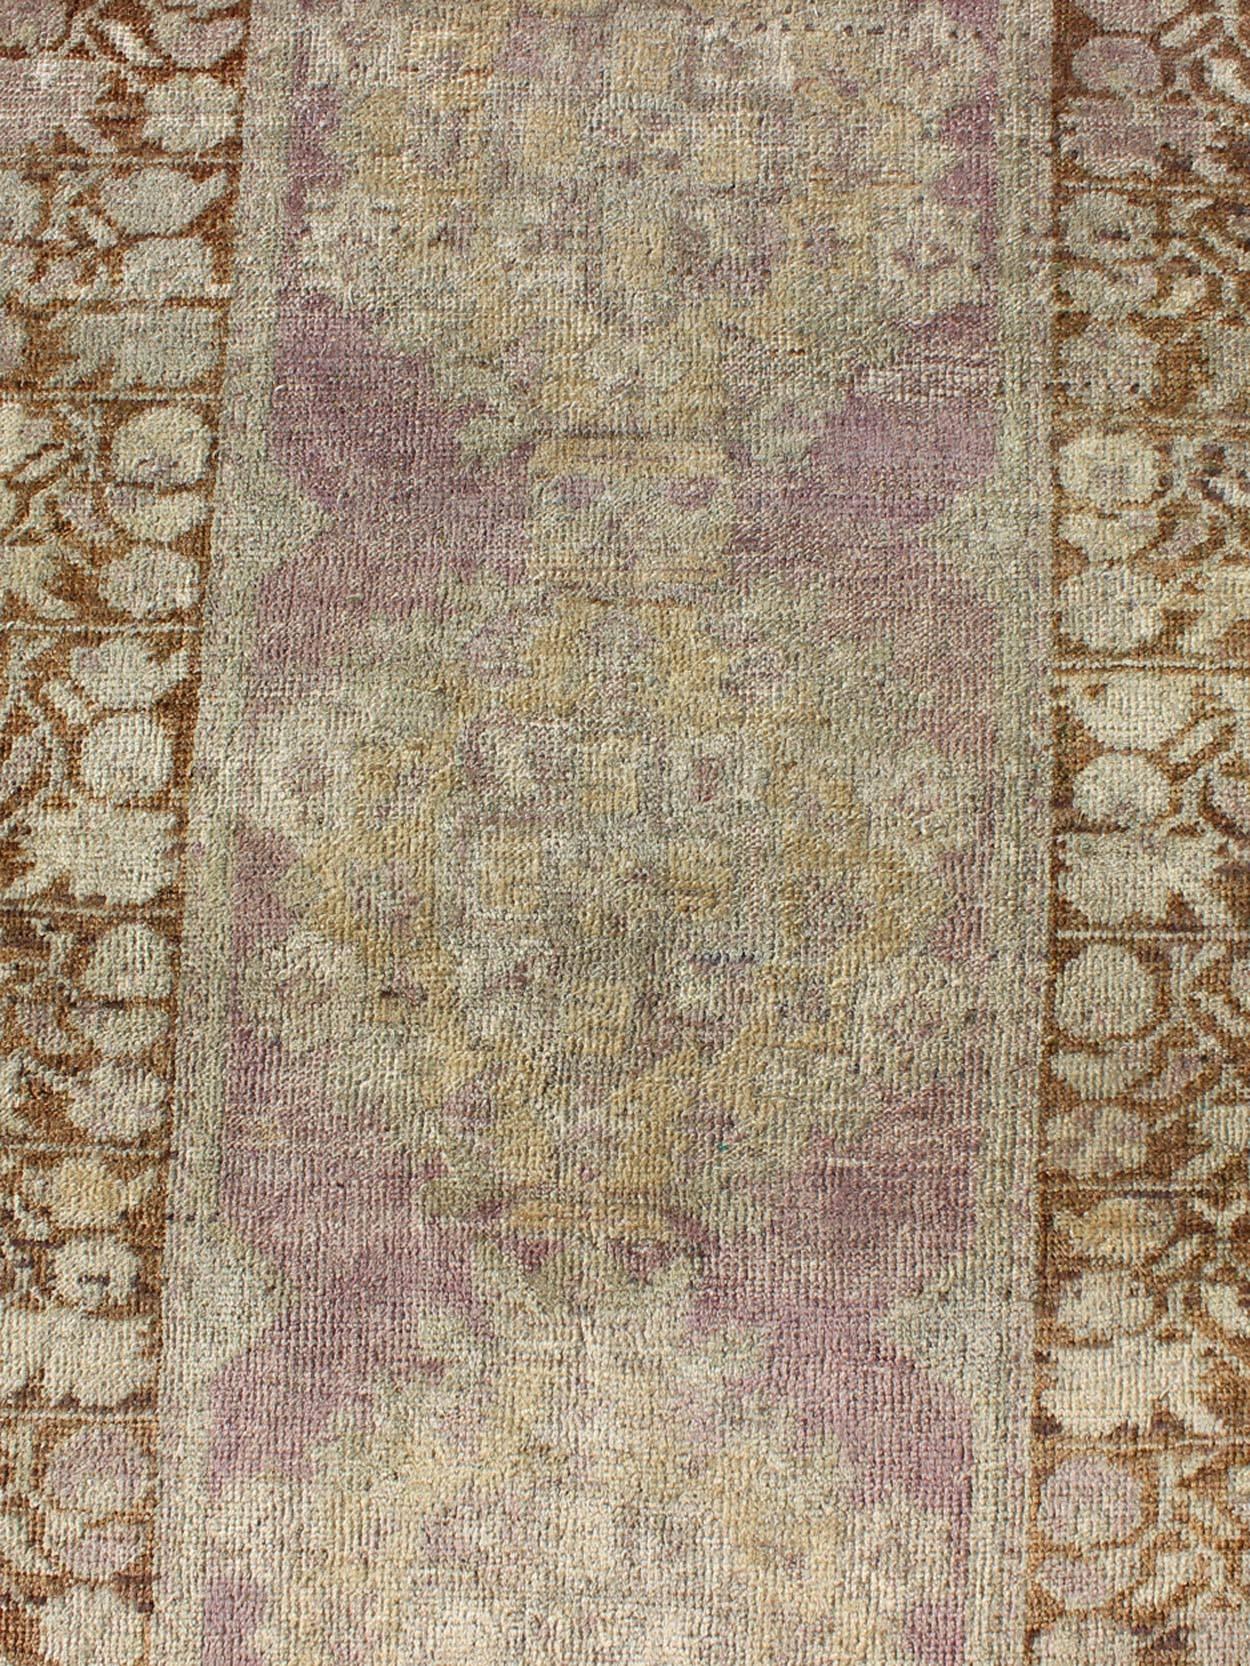 Mid-20th Century Vintage Oushak Runner in Light Purple, Lavender, Cream and Brown For Sale